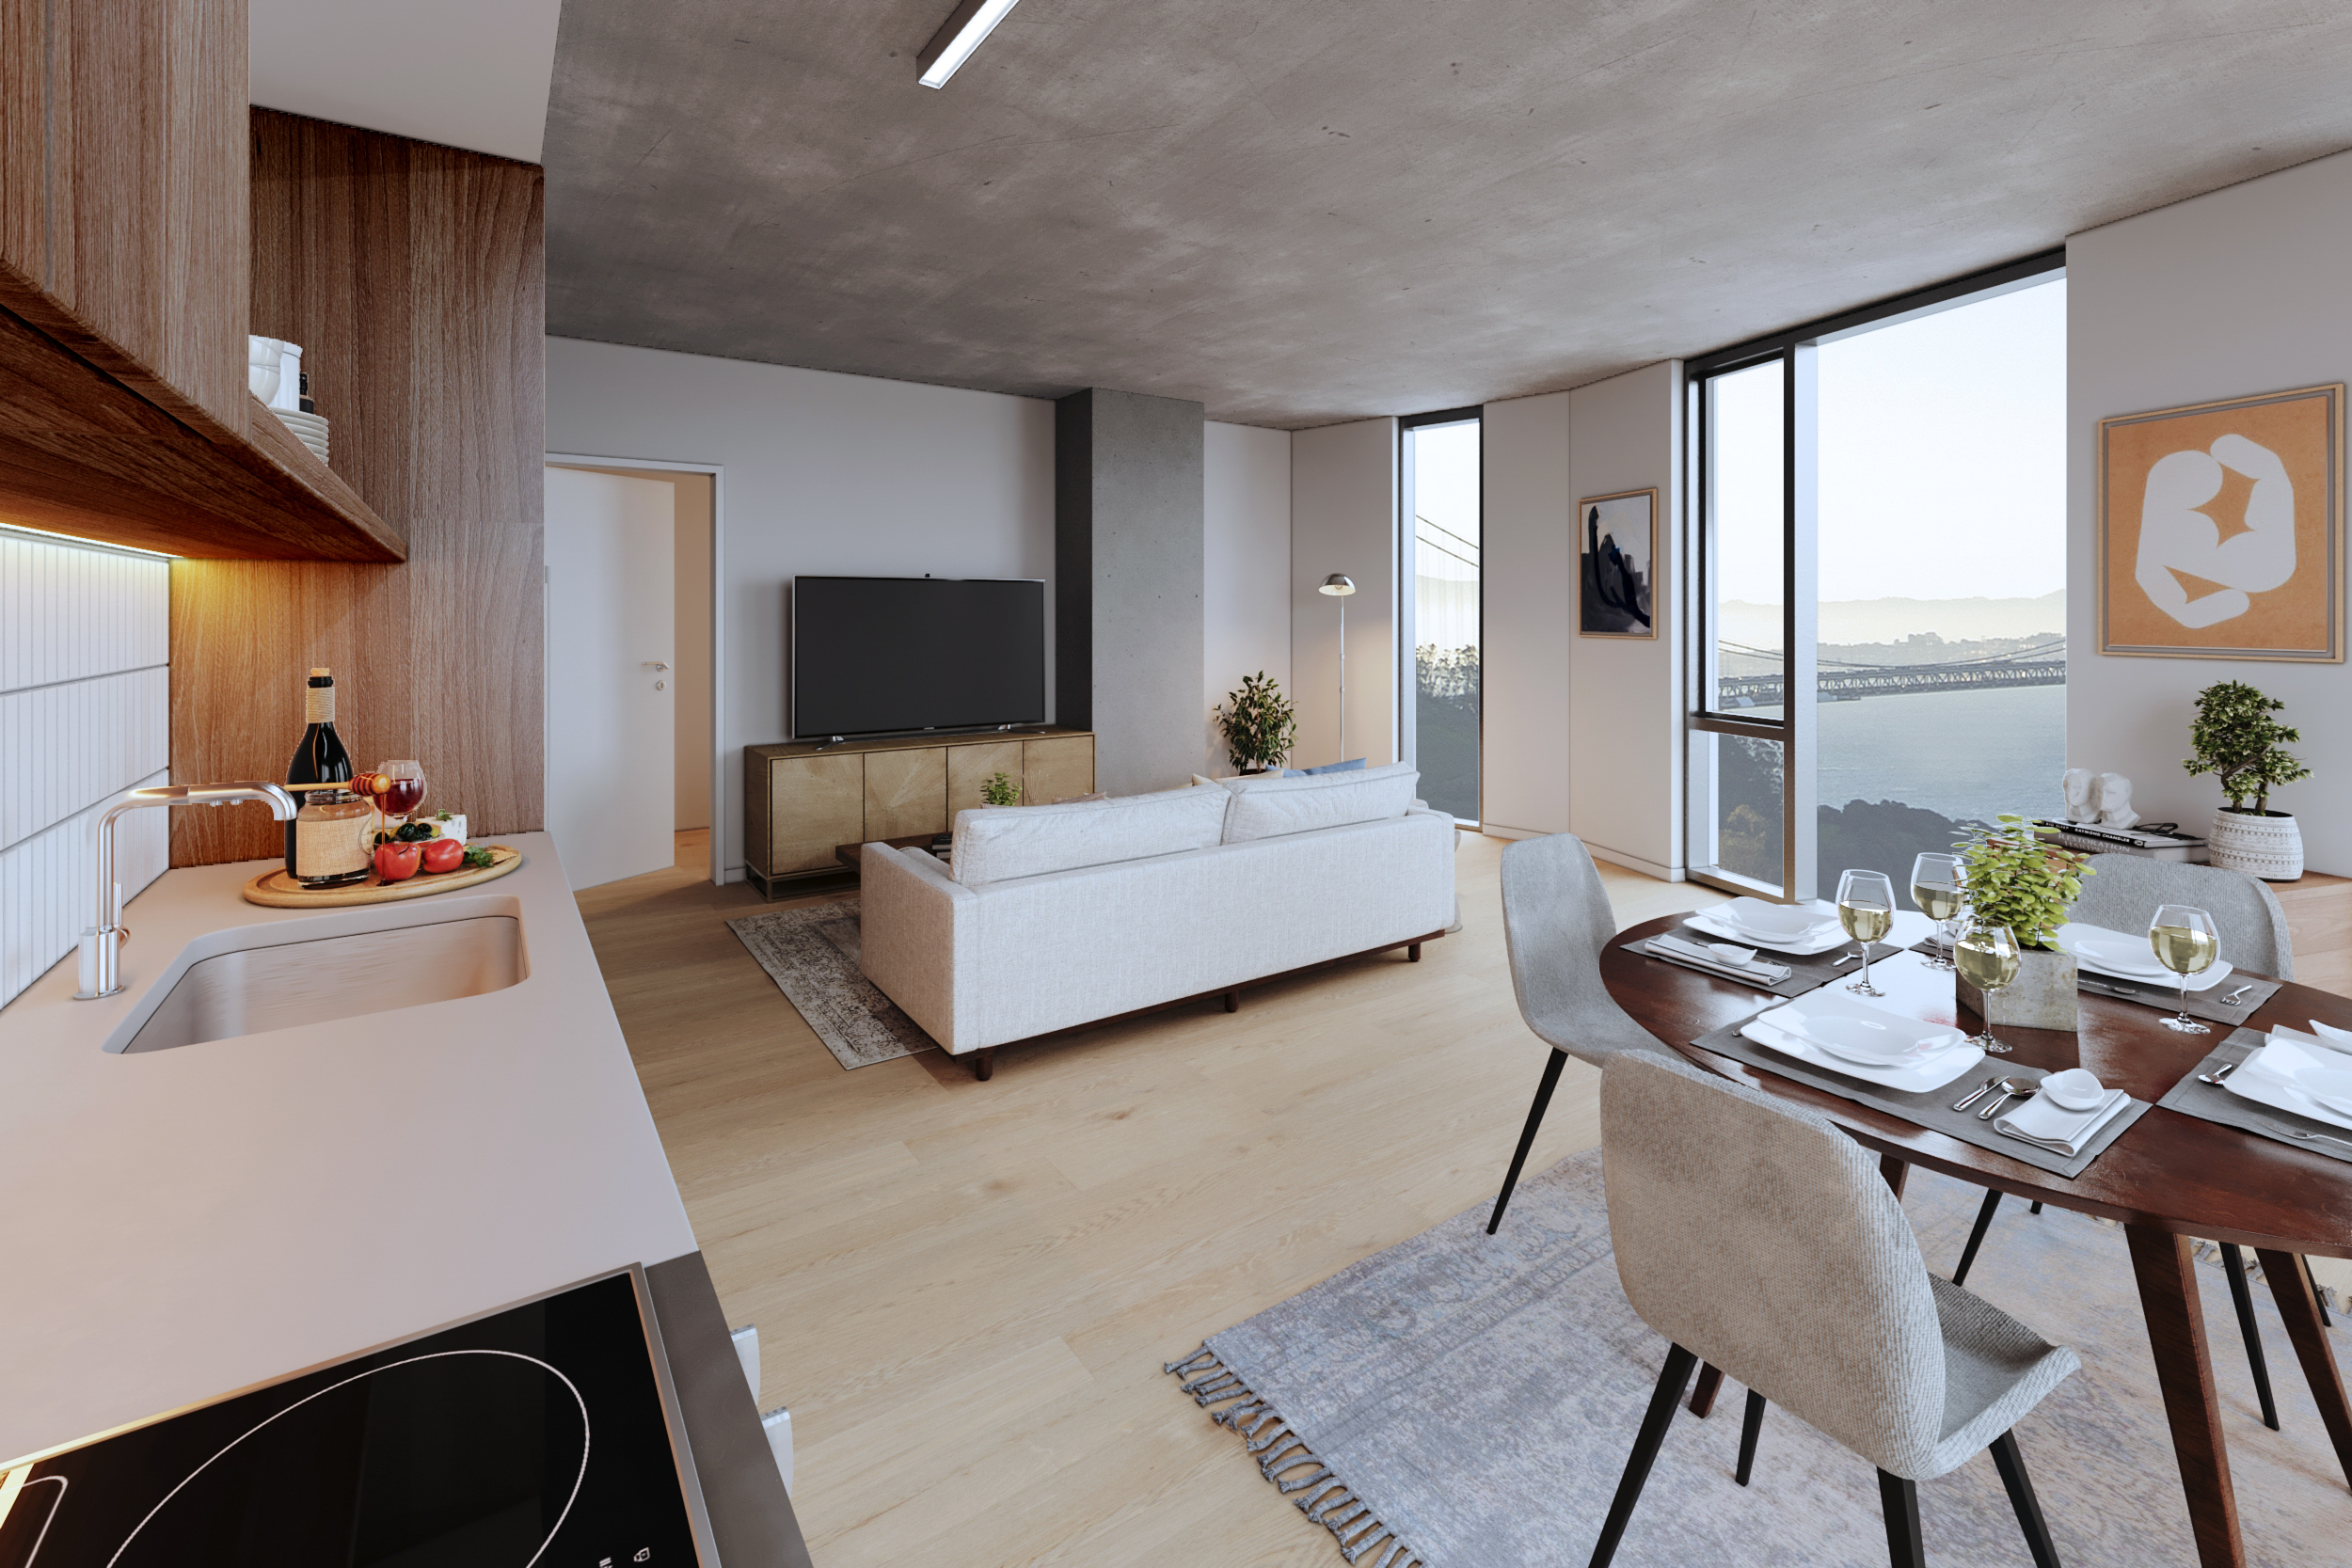 Tidal House living space interior, rendering by David Baker Architects